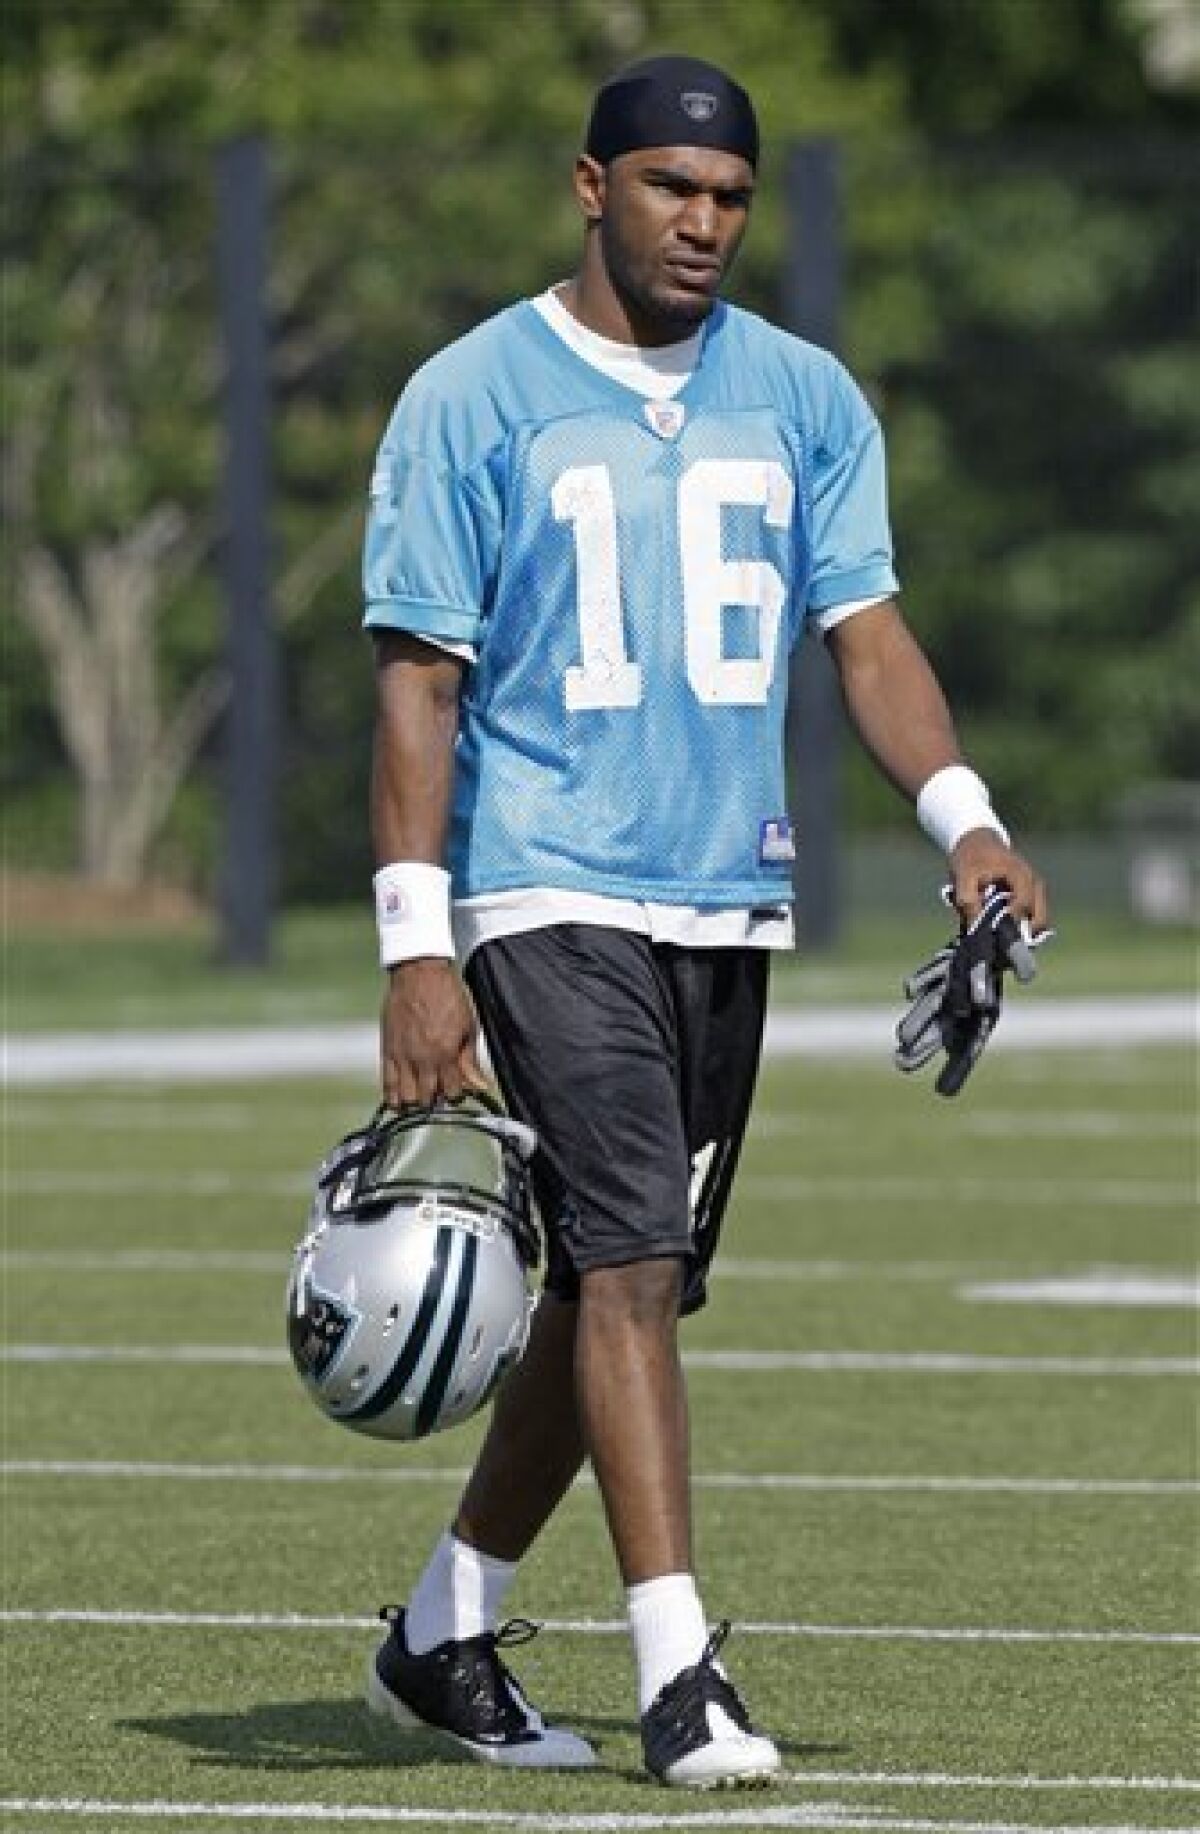 Carolina Panthers receiver Larry Beavers is shown during the NFL football team's summer training sessions in Charlotte, N.C., Monday, June 8, 2009. Beavers is small and untested after playing for a tiny Division III school. But you can't ignore his blazing speed or the stunning numbers he put up as a kick returner in college. The Carolina Panthers hope it translates to the NFL. (AP Photo/Chuck Burton)